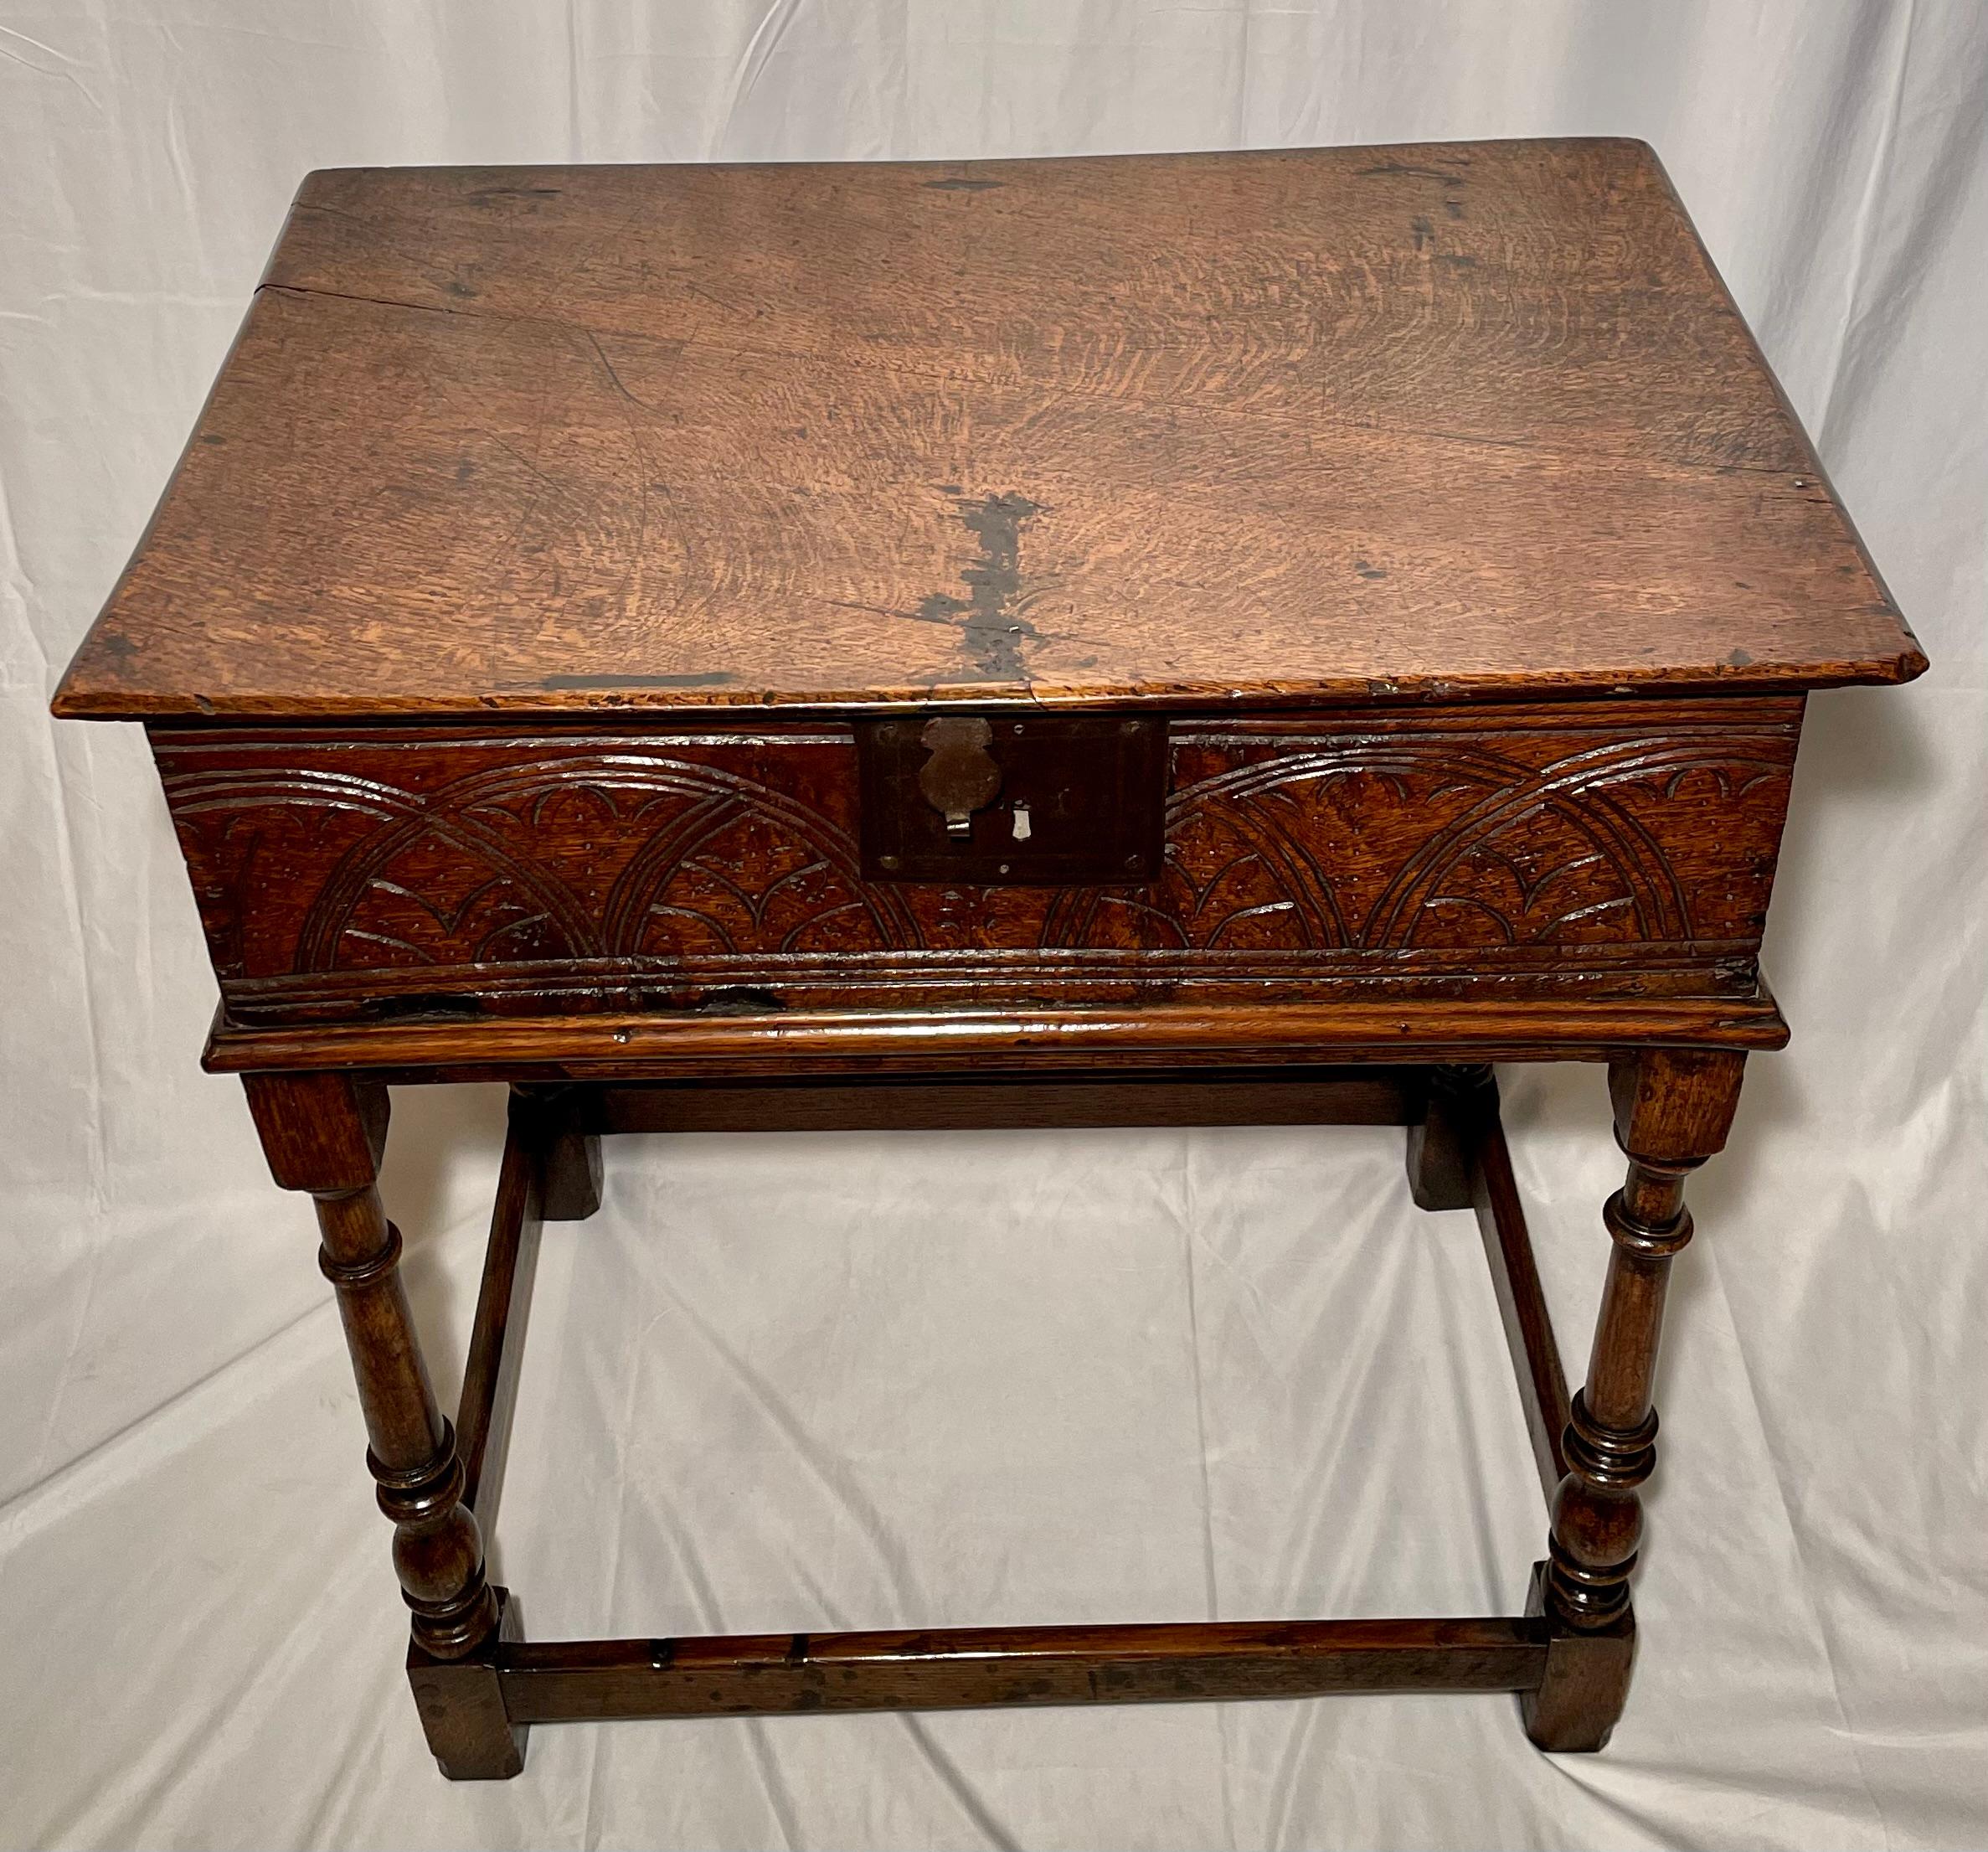 Antique English Hand-Carved Oak table with Interior Compartment, Circa 1840.